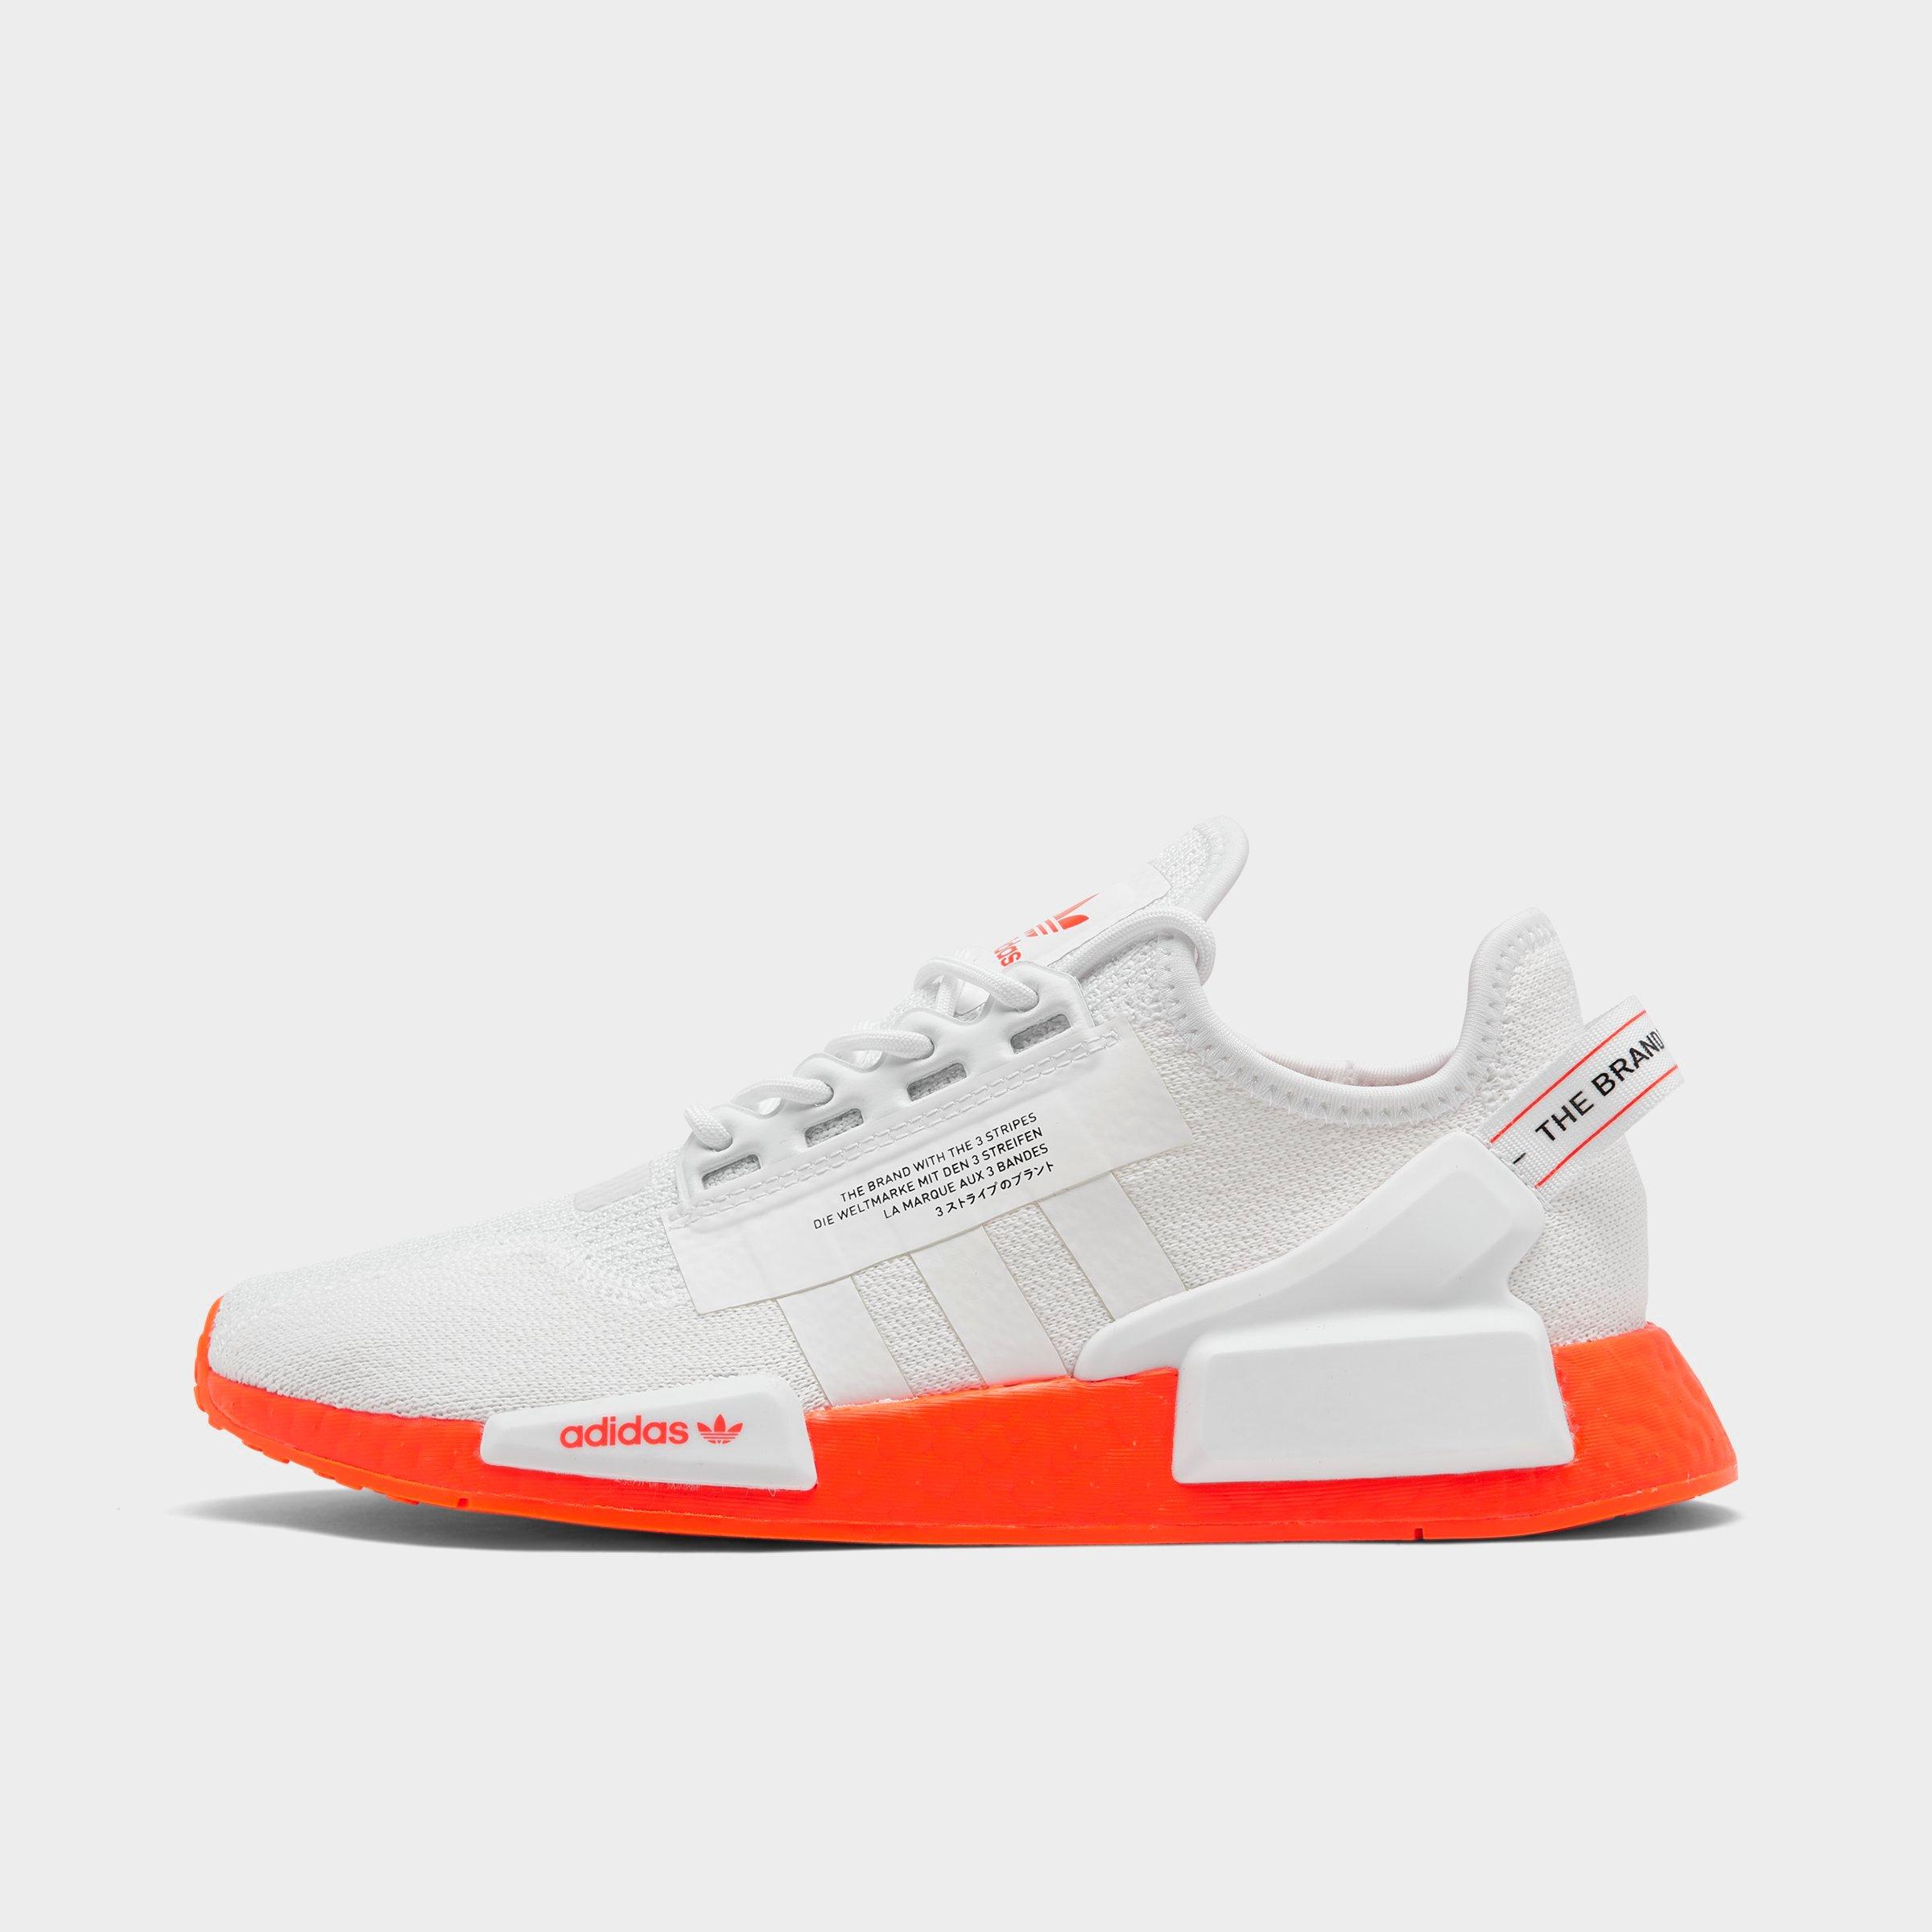 Adidas nmd r1 gum online store free agents